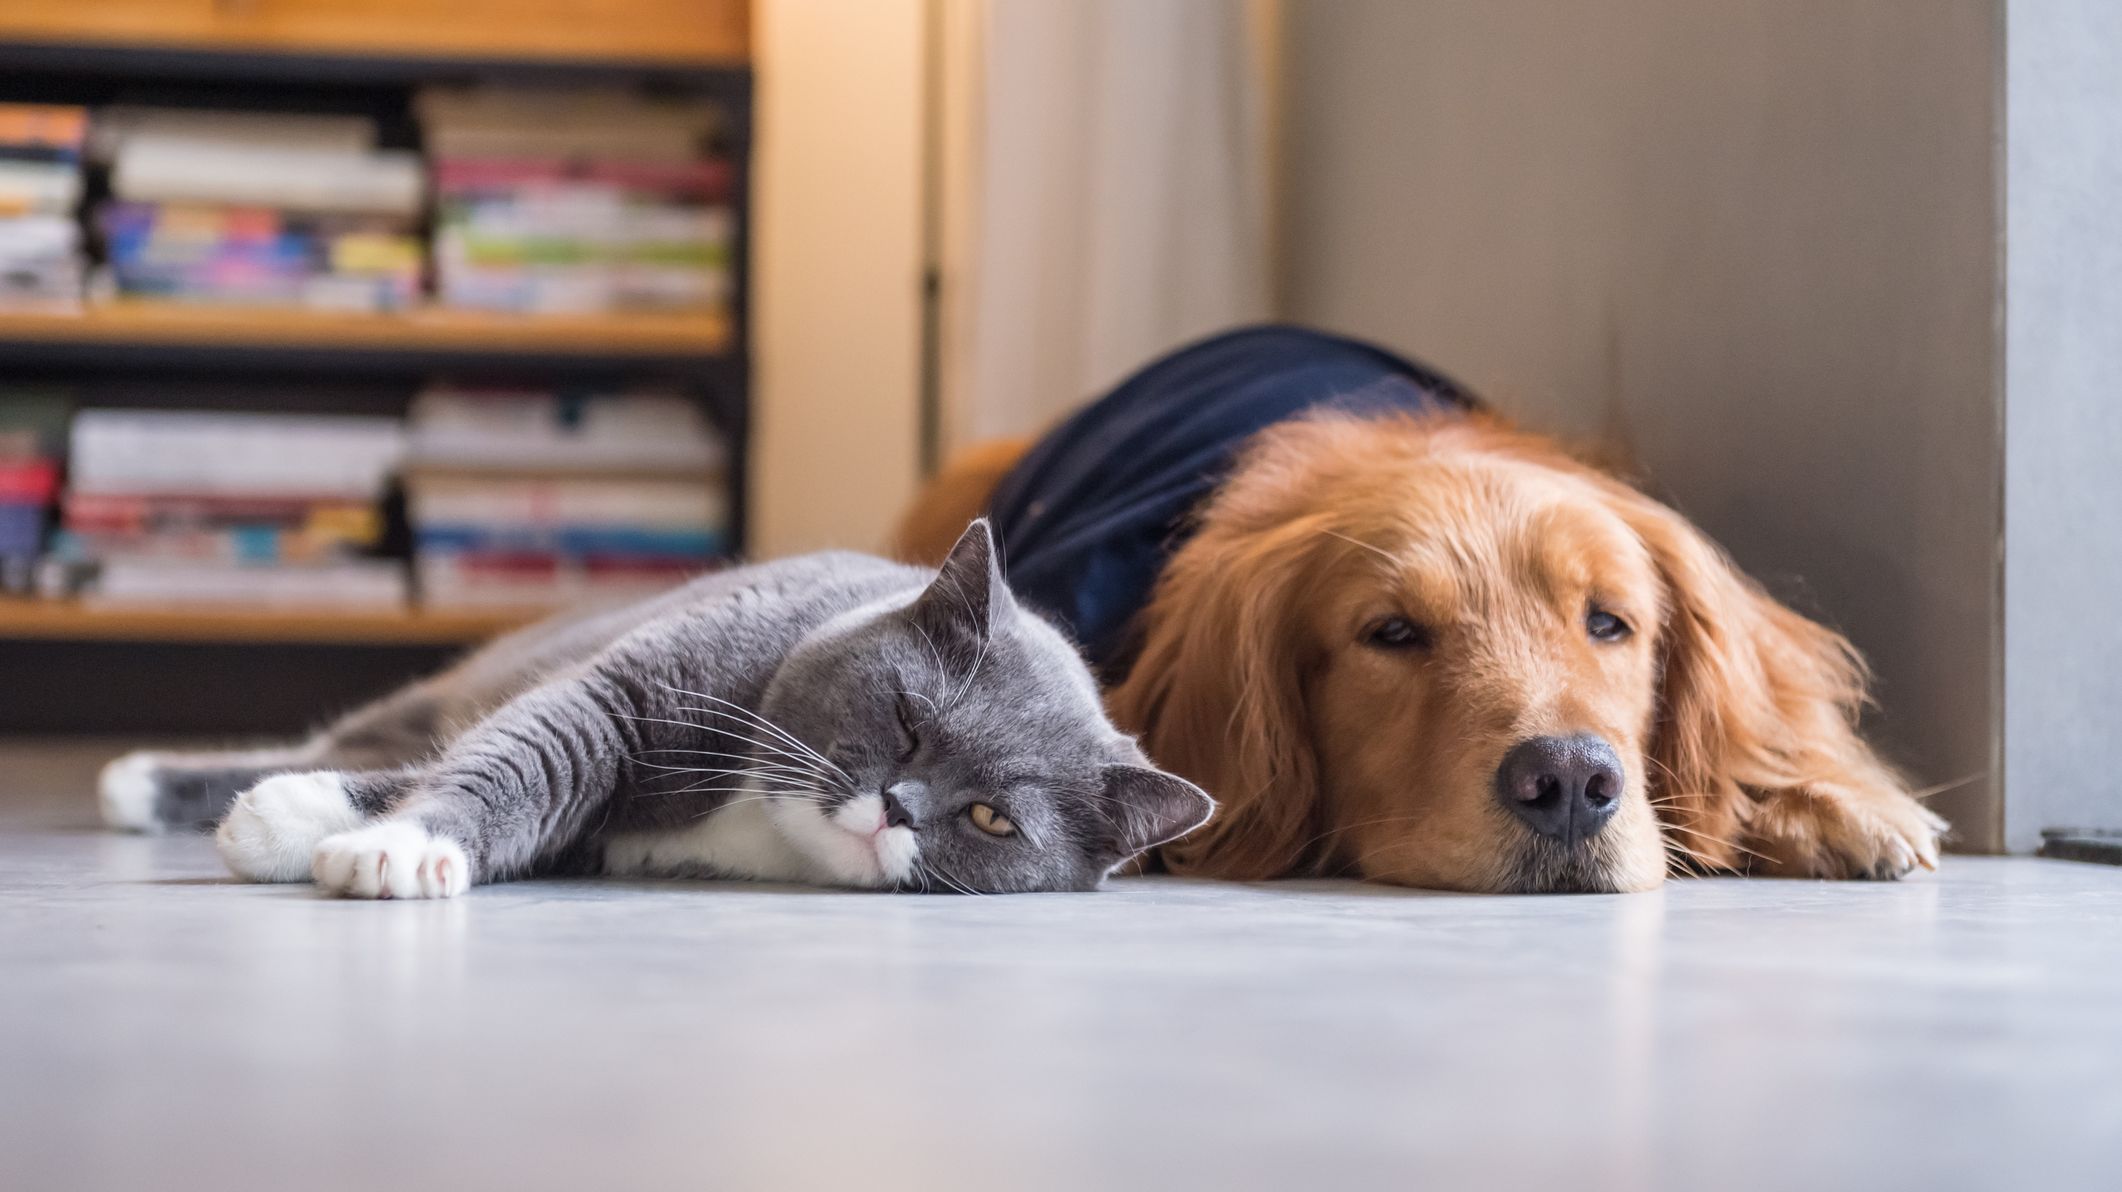 5 Dog Breeds That Get Along With Cats